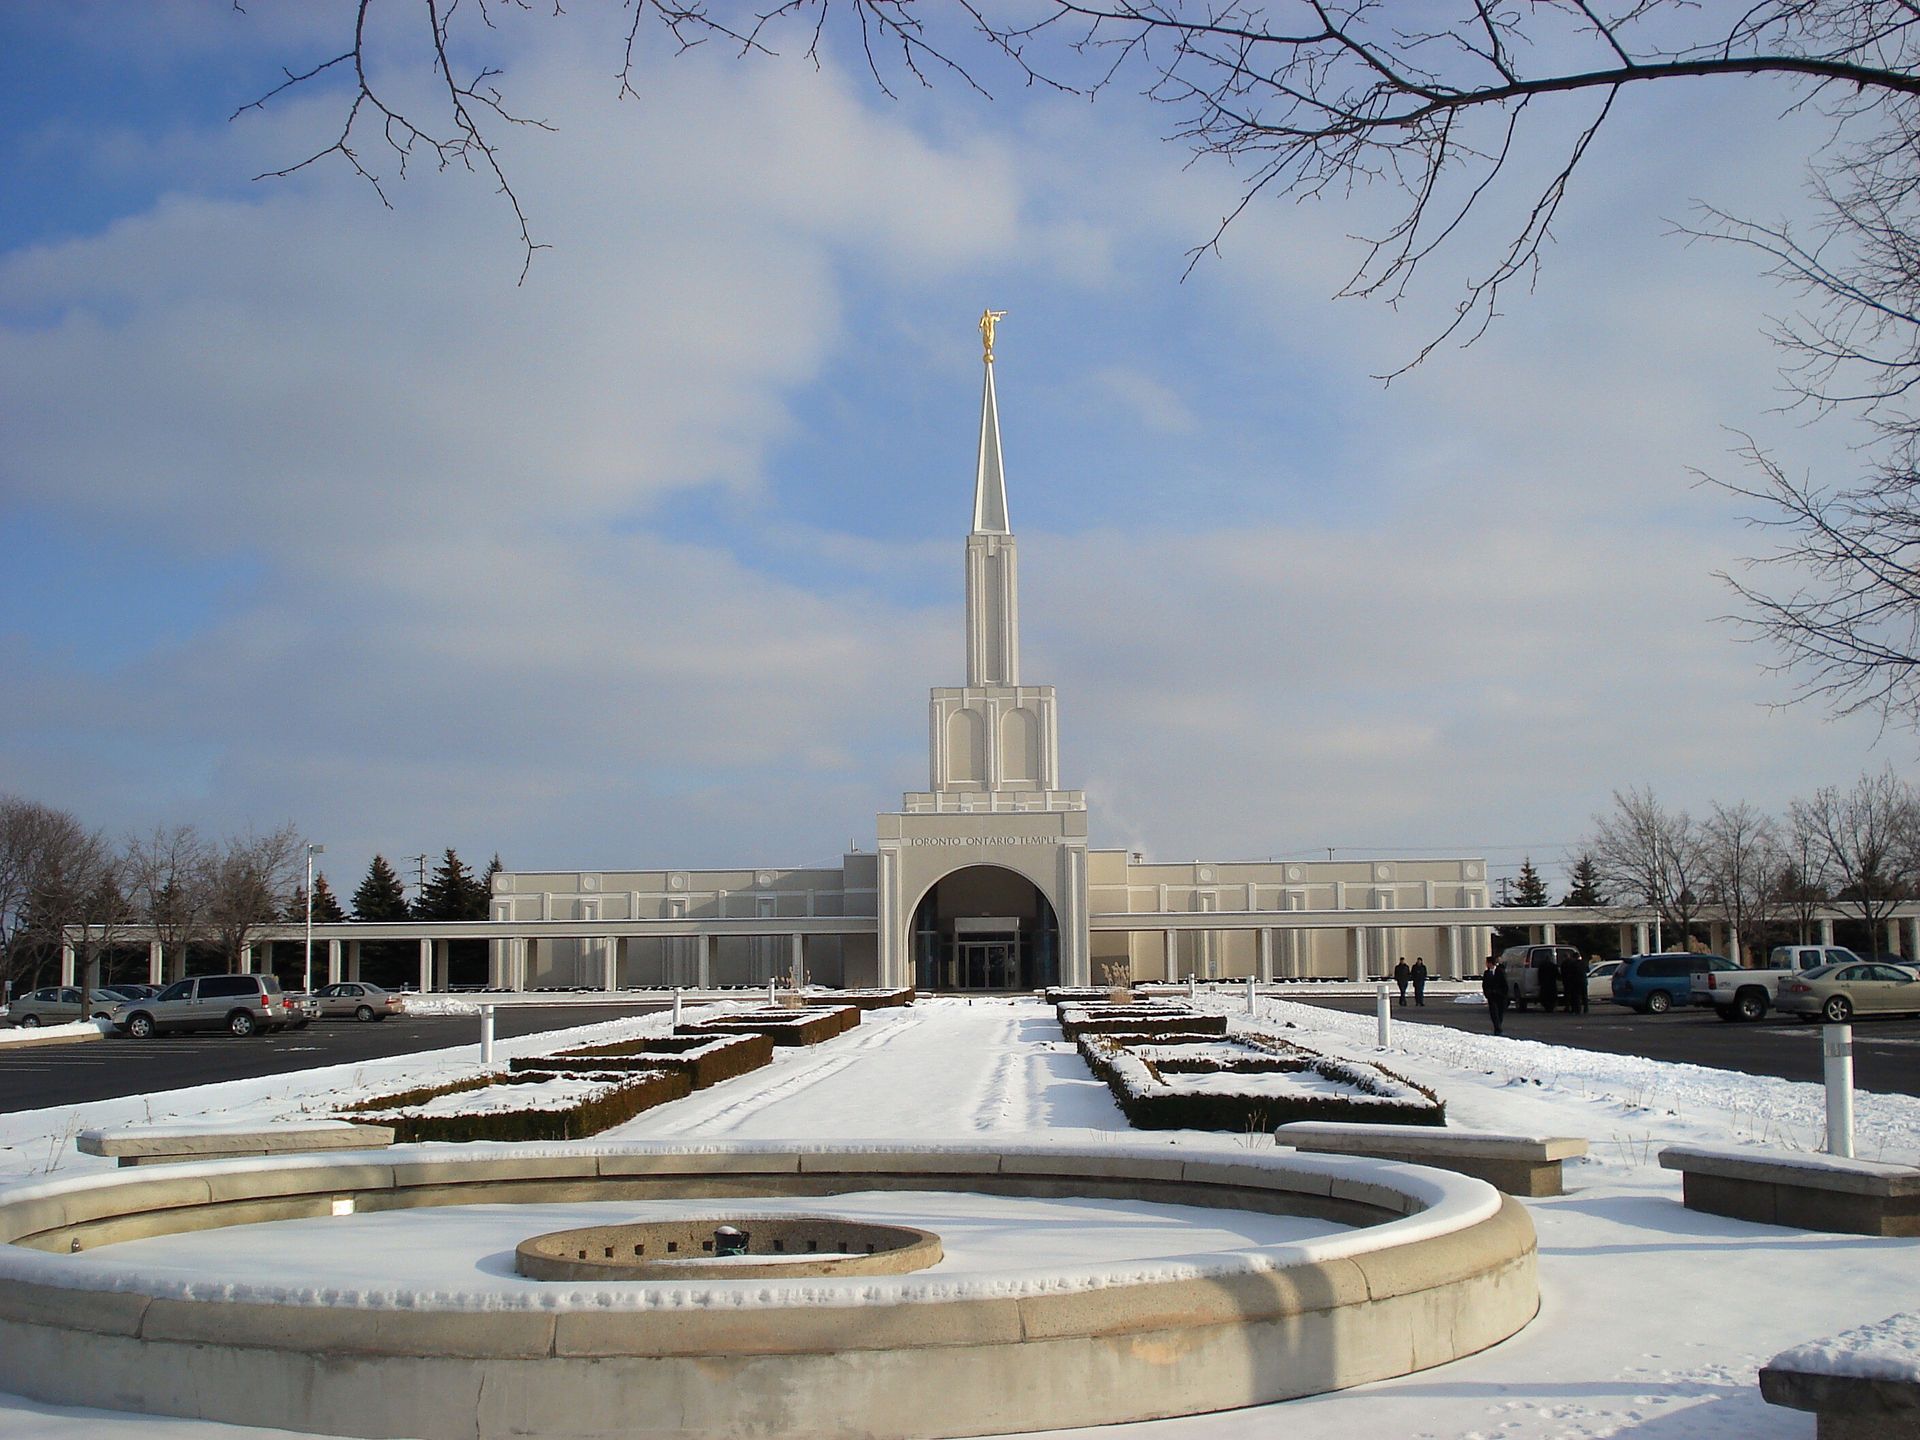 The Toronto Ontario Temple in the winter, including the fountain, entrance, and scenery.